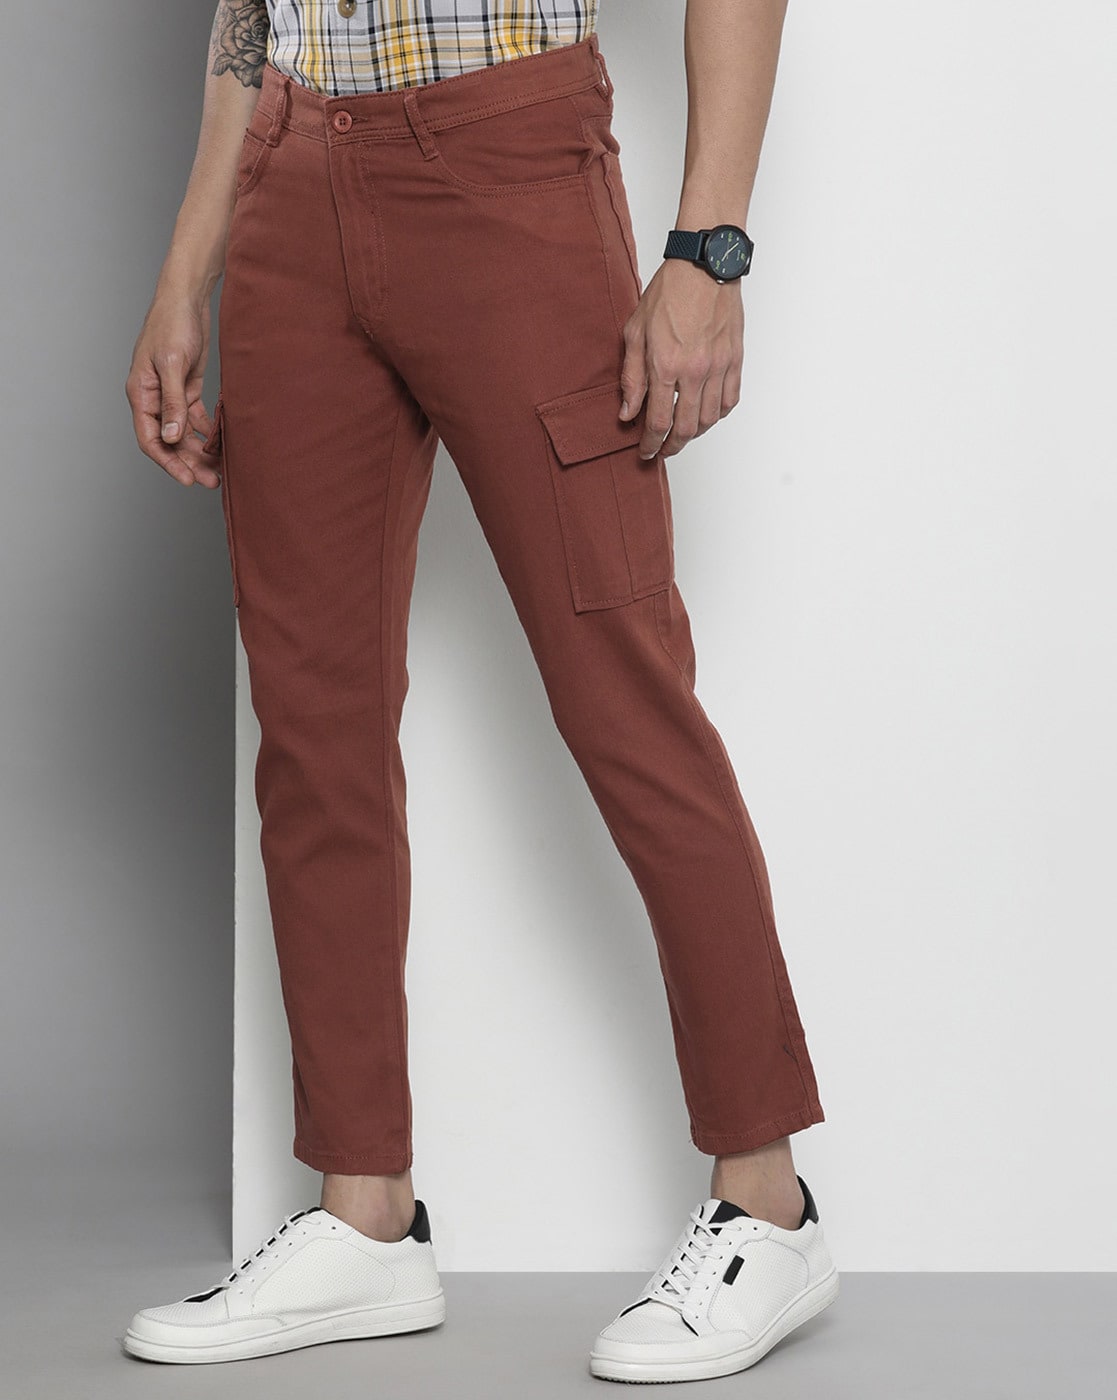 The Indian Garage Co Trousers  Buy The Indian Garage Co Trousers online in  India